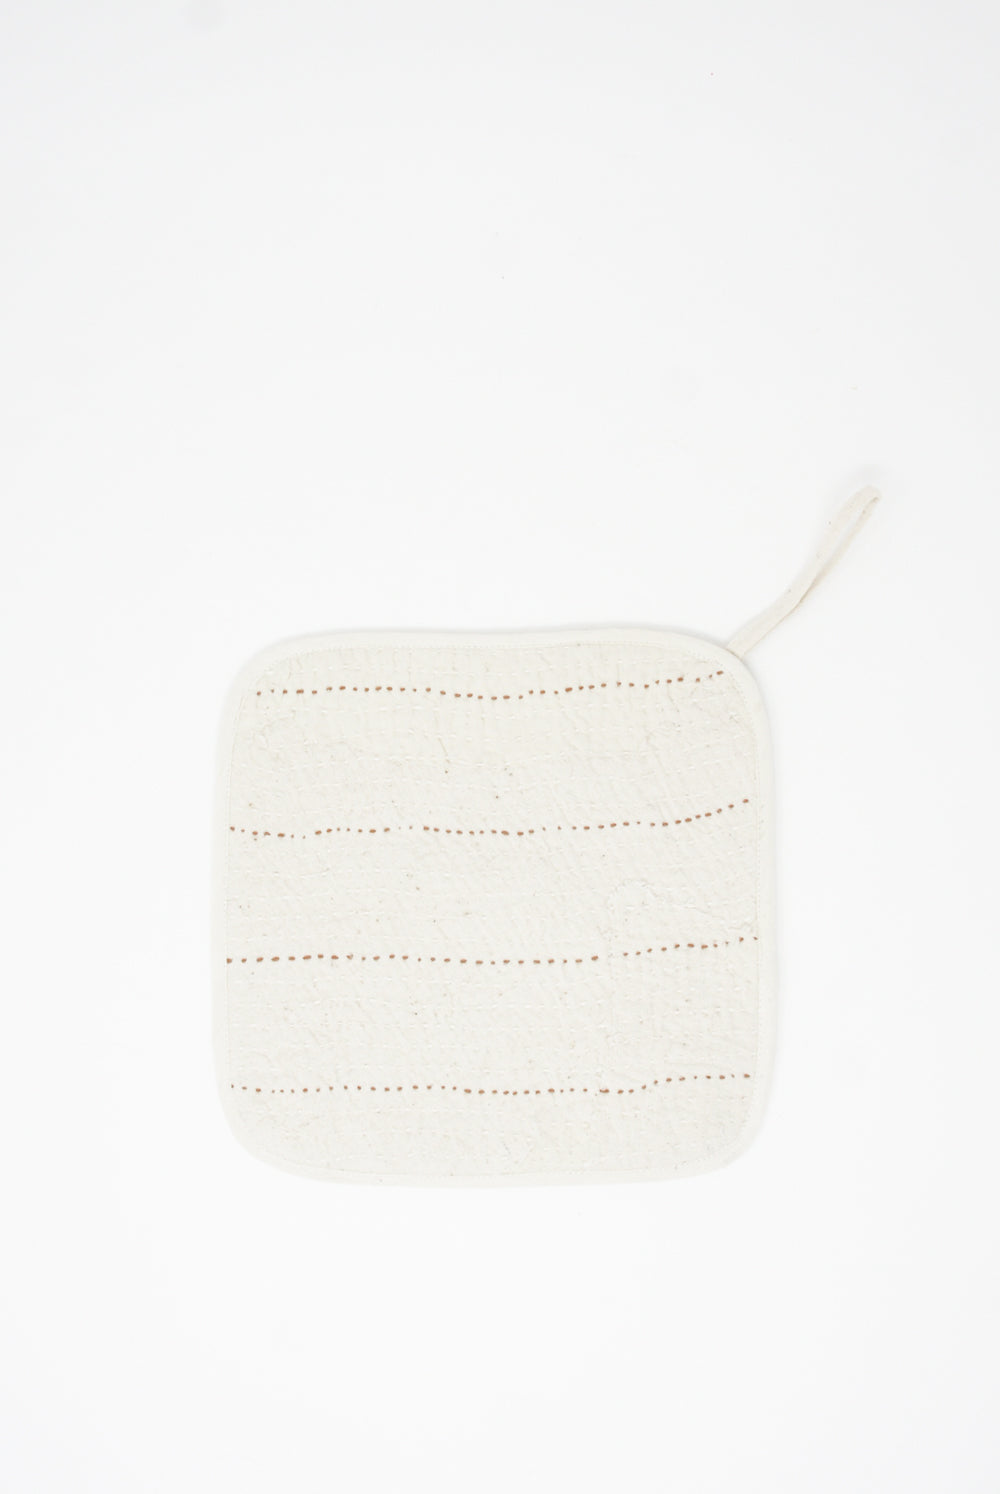 White Hand Quilted Pot Holder in Ecru with stitched patterns against a white background, created from zero-waste textiles by 11.11.